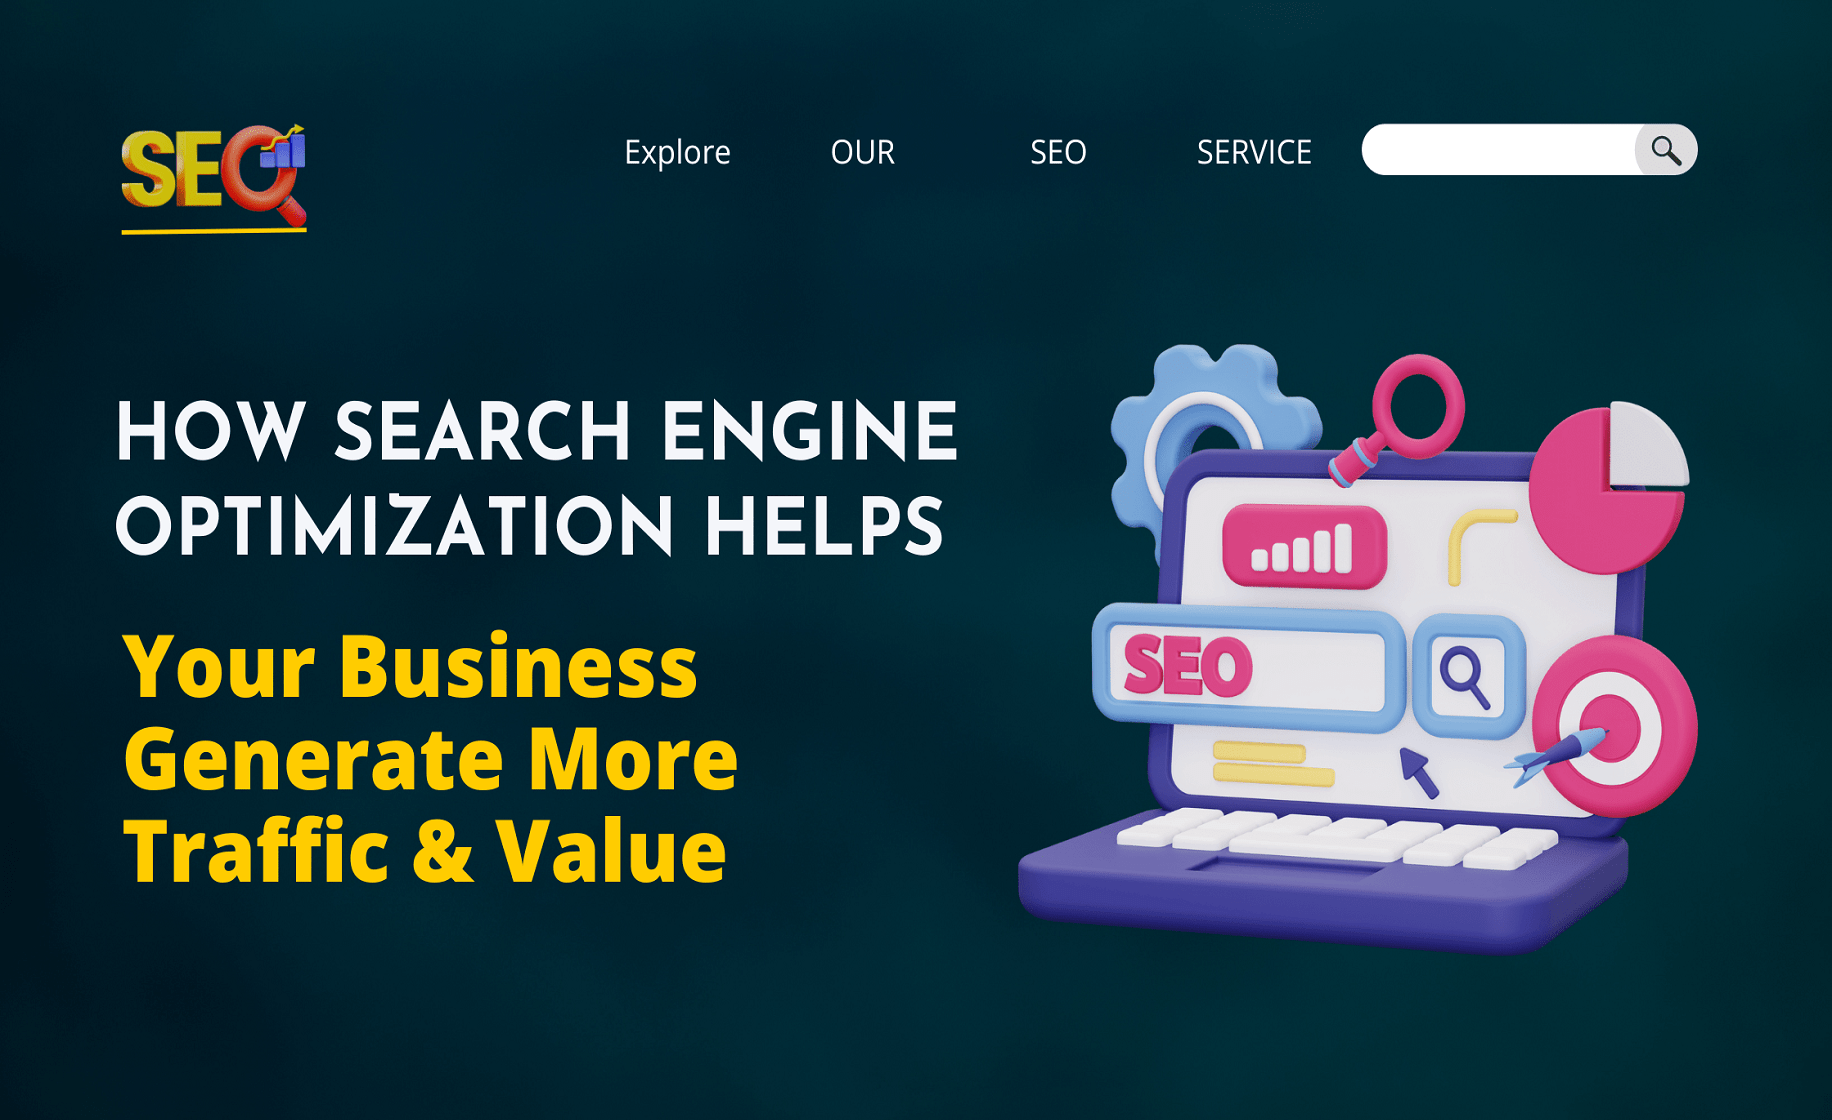 How Search Engine Optimization Helps Your Business Generate More Traffic and Value